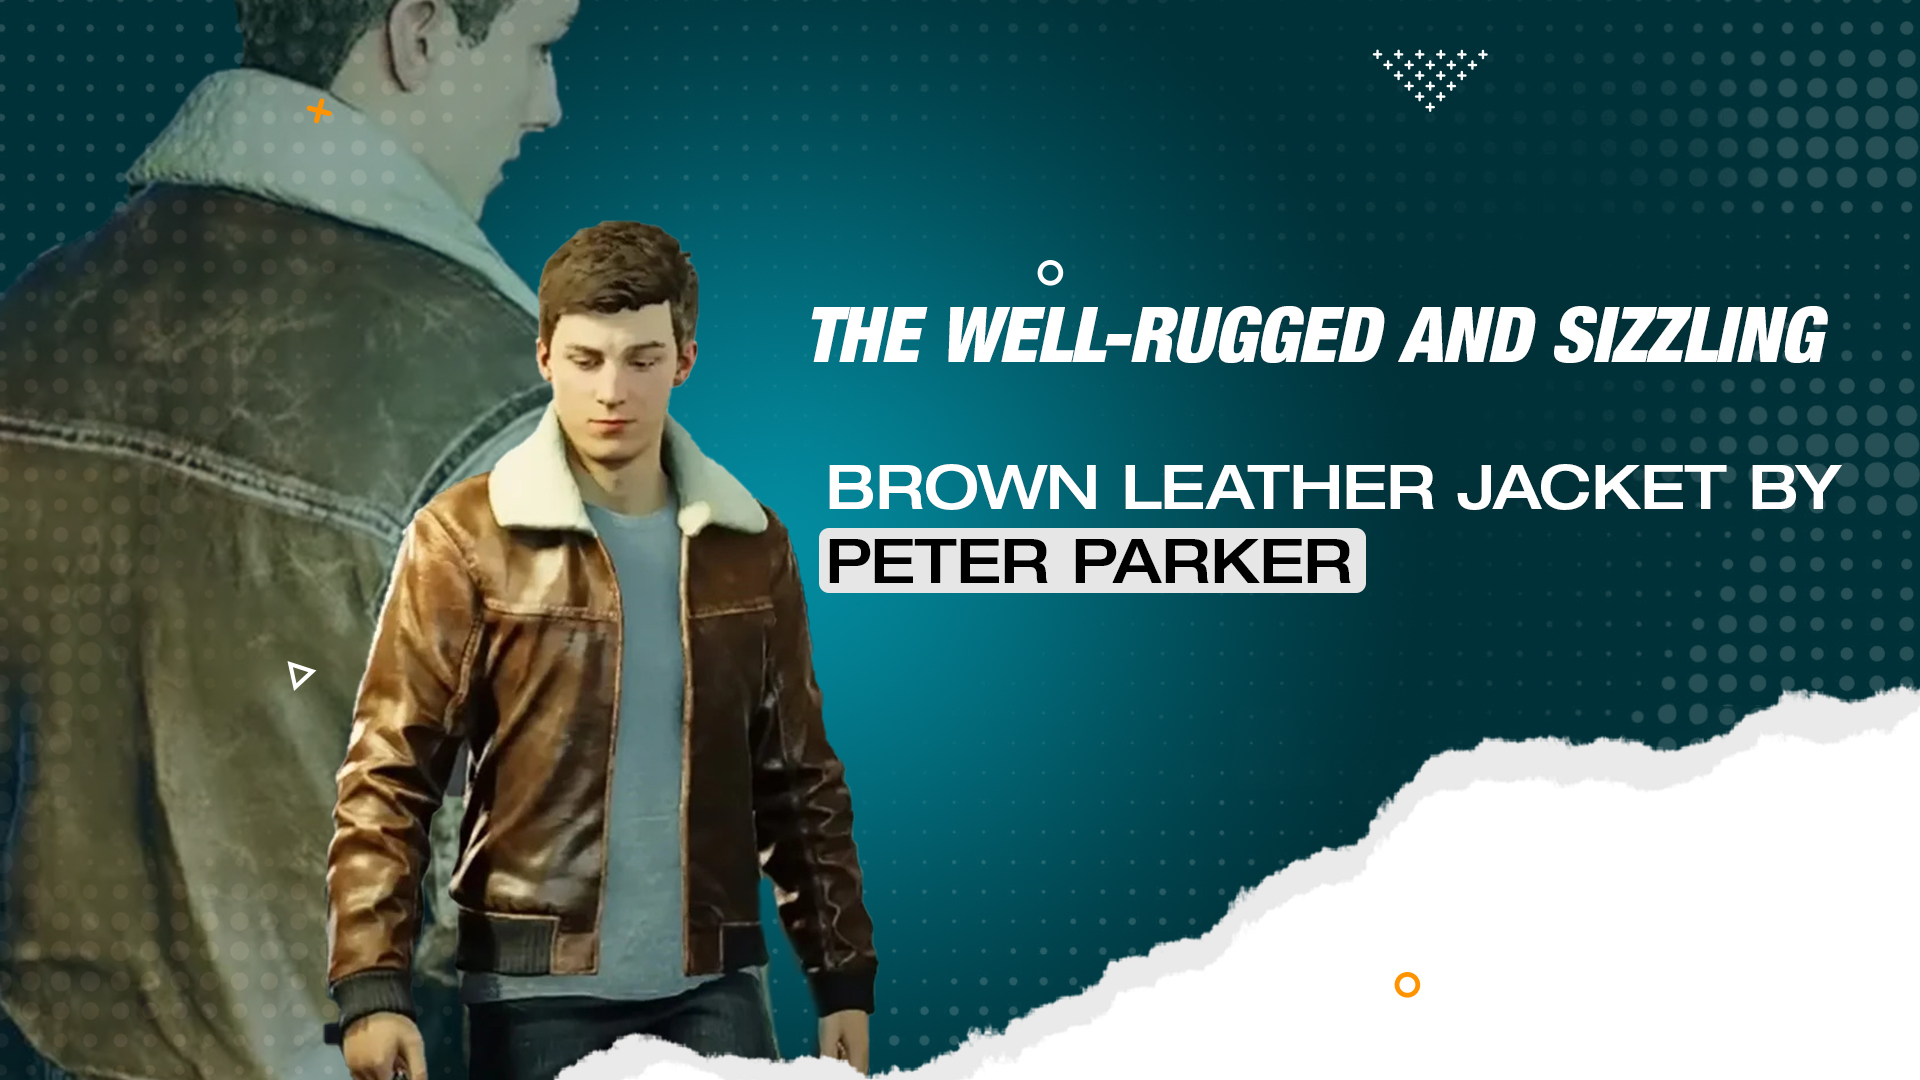 The Well-Rugged And Sizzling Brown Leather Jacket By Peter Parker